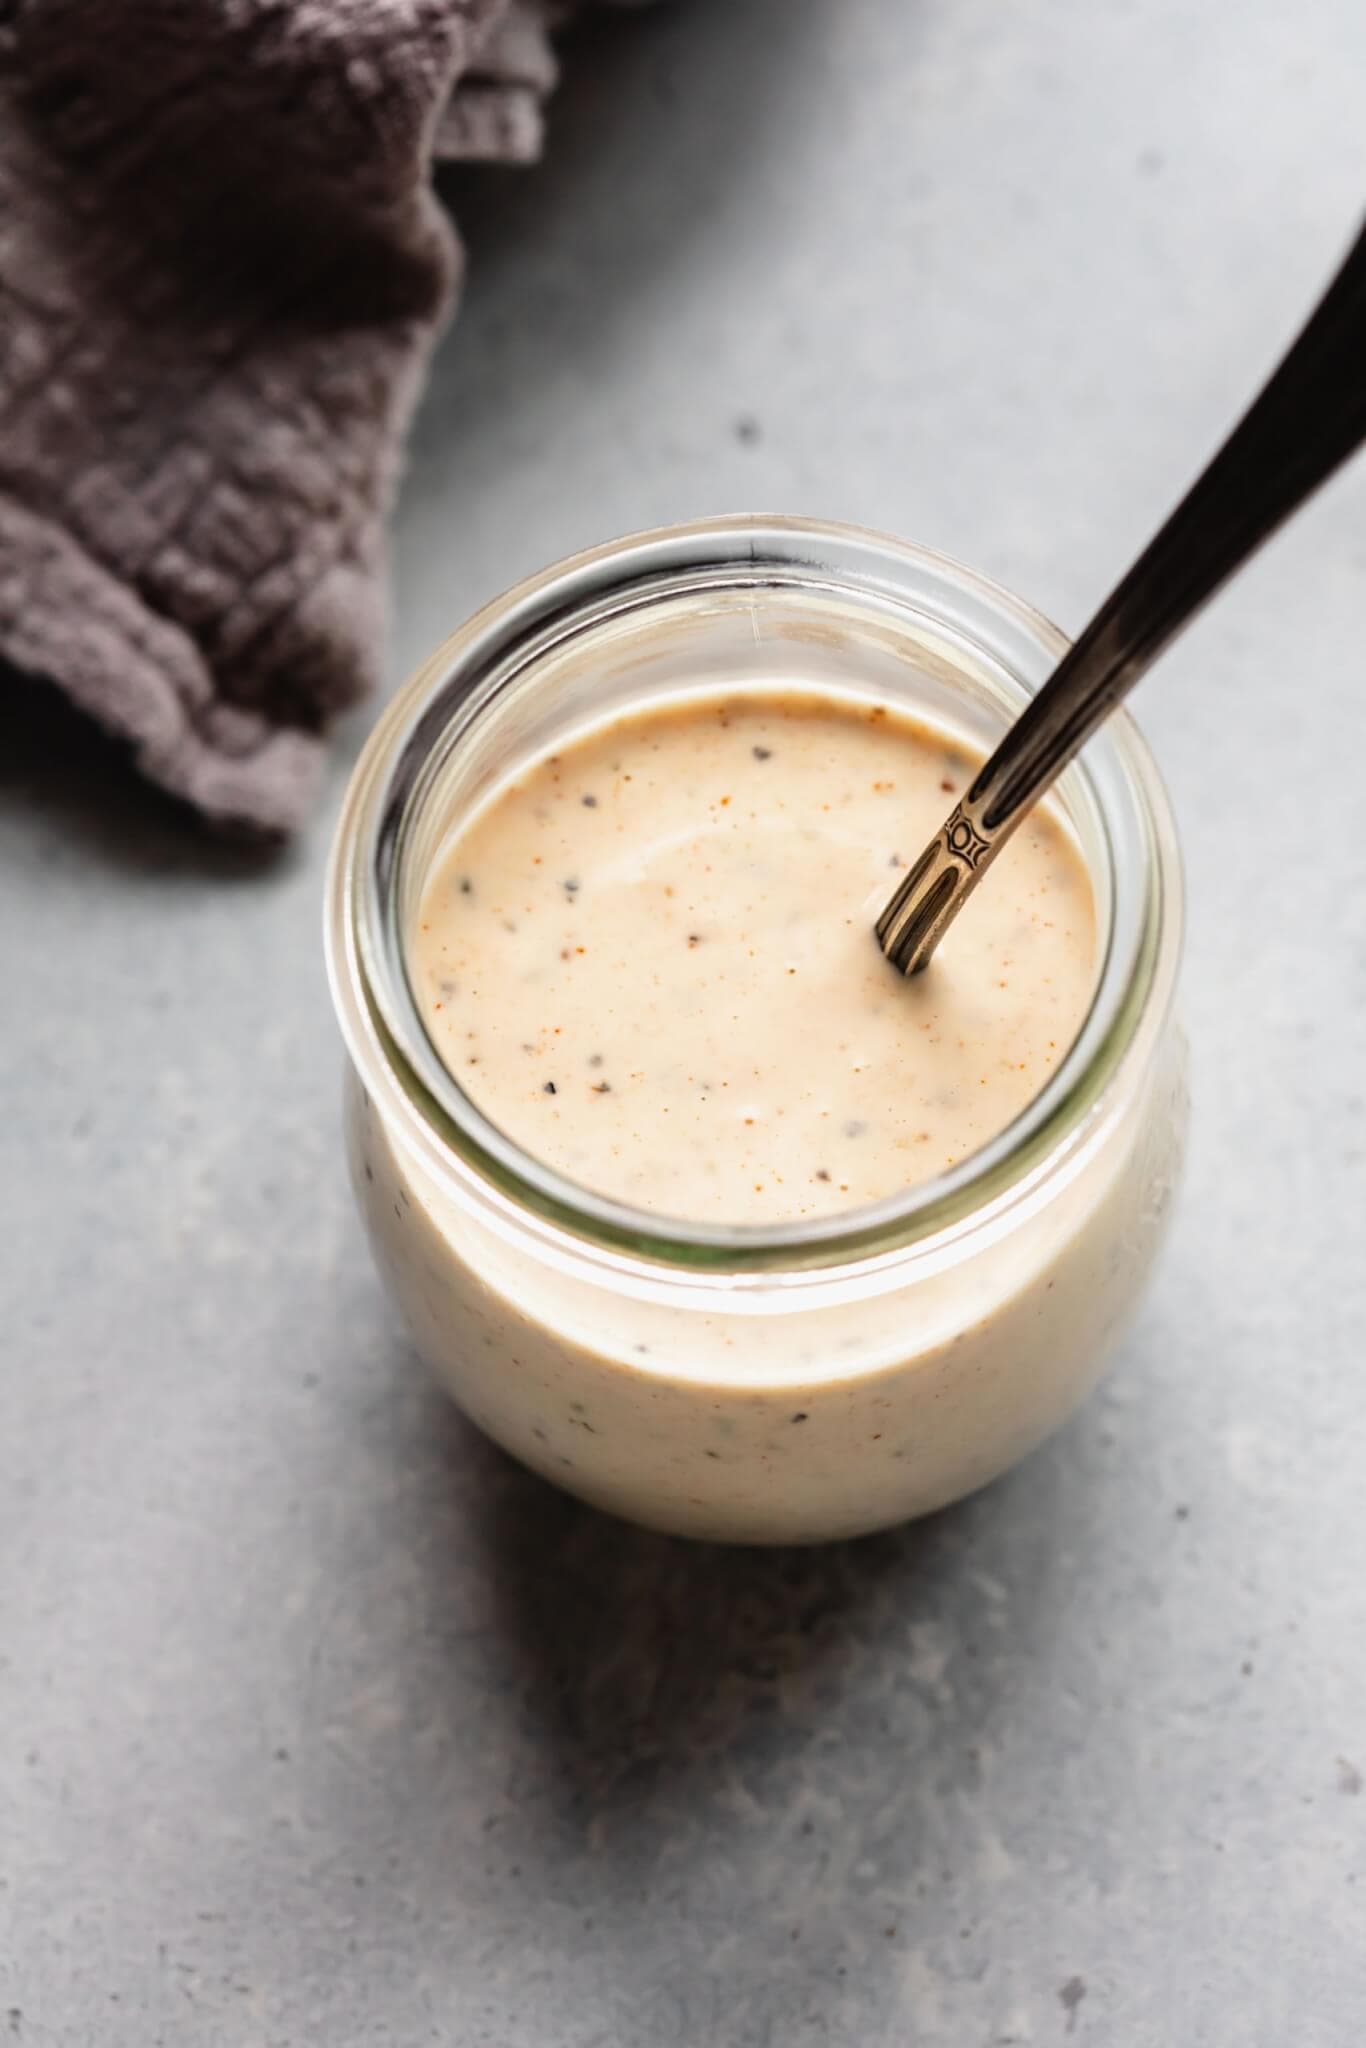 SIDE VIEW OF WHITE BBQ SAUCE IN SMALL JAR WITH SPOON.